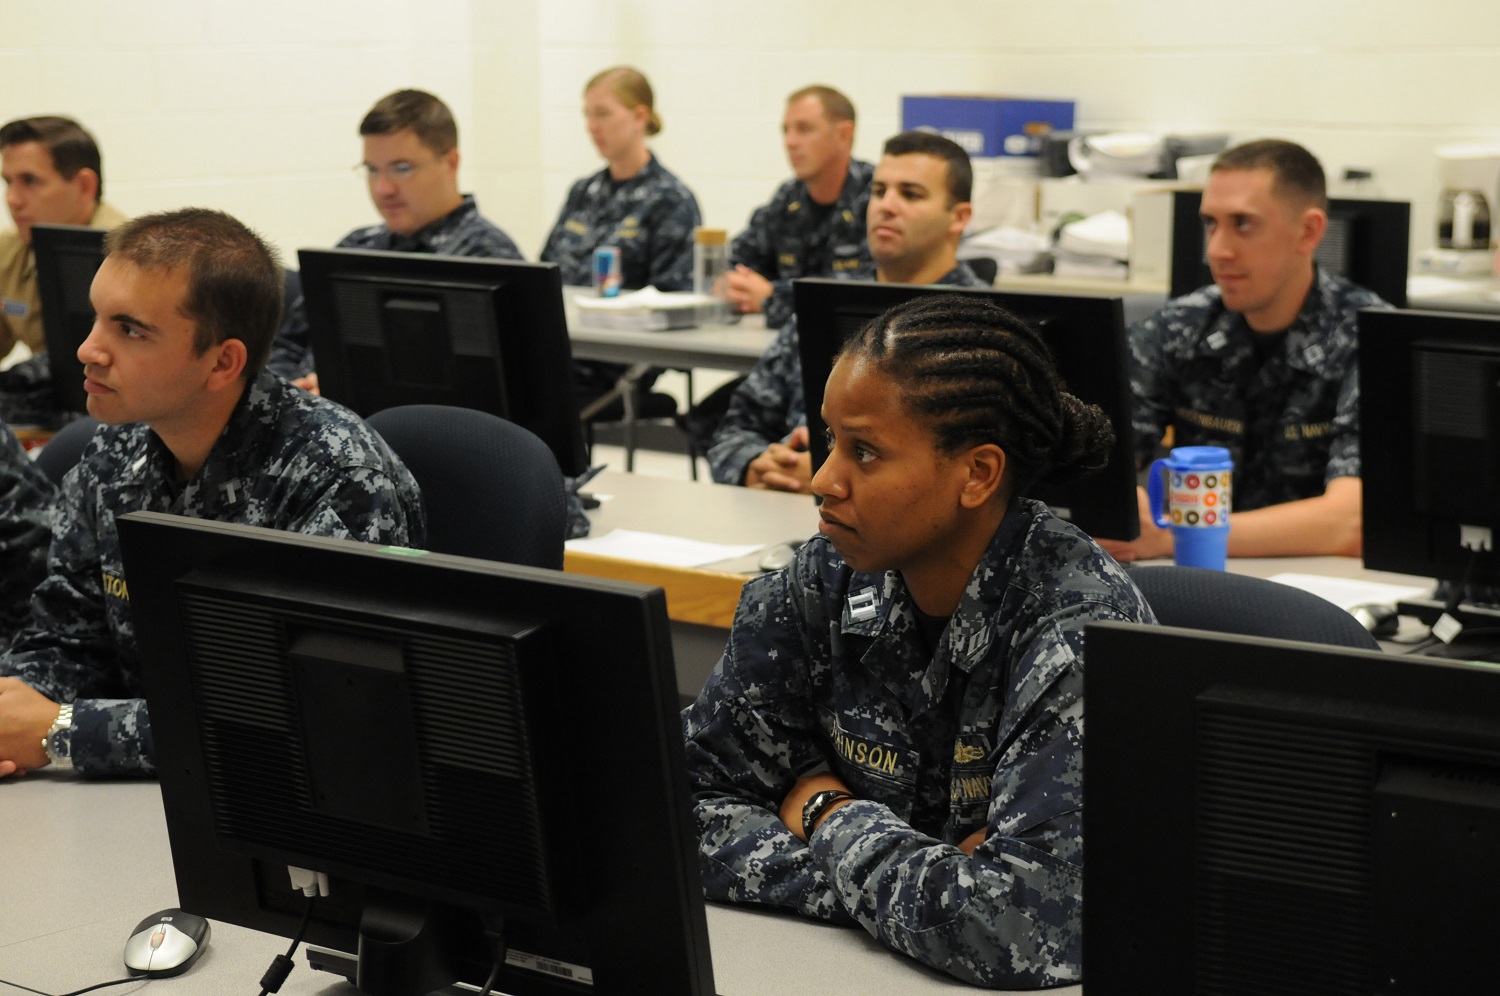 150828-N-PU674-005 PENSACOLA, Fla. (Aug. 28, 2015) Officers attending the Information Professional Basic Course at Center for Information Dominance Unit Corry Station listen to Rear Adm. Daniel J. MacDonnell, commander of Information Dominance Corps Reserve Command (IDCRC) and Reserve deputy commander of Navy Information Dominance Forces (NAVIDFOR). Macdonnell spoke with them about career opportunities in the Information Dominance Corps and active and reserve integration. (U.S. Navy photo by Carla M. McCarthy/Released)